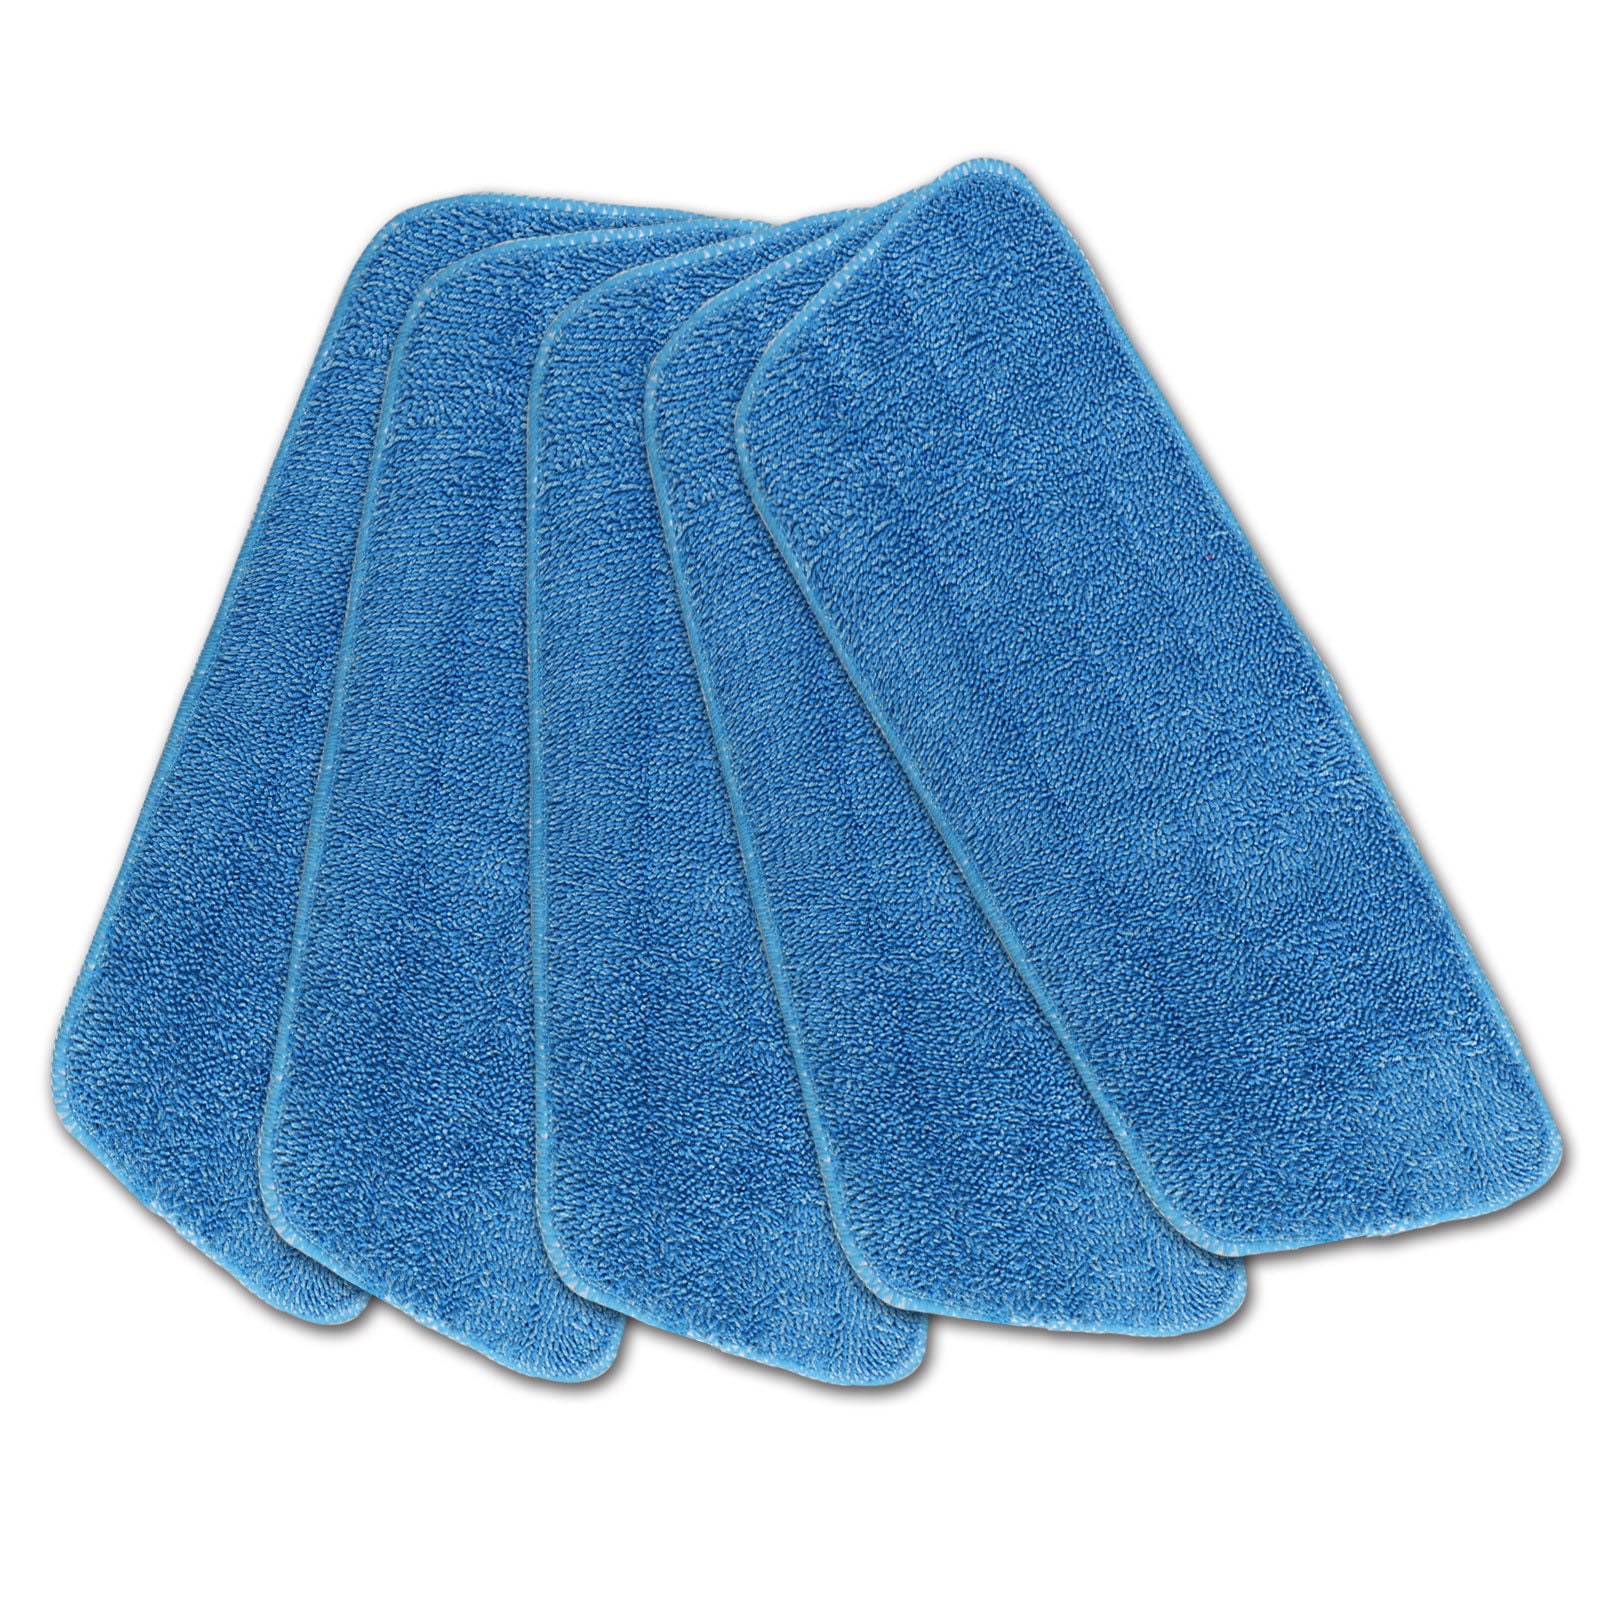 8 New Micro Fiber Mop Pads Blue Cleaning Pad Great For Janitorial Co Use 